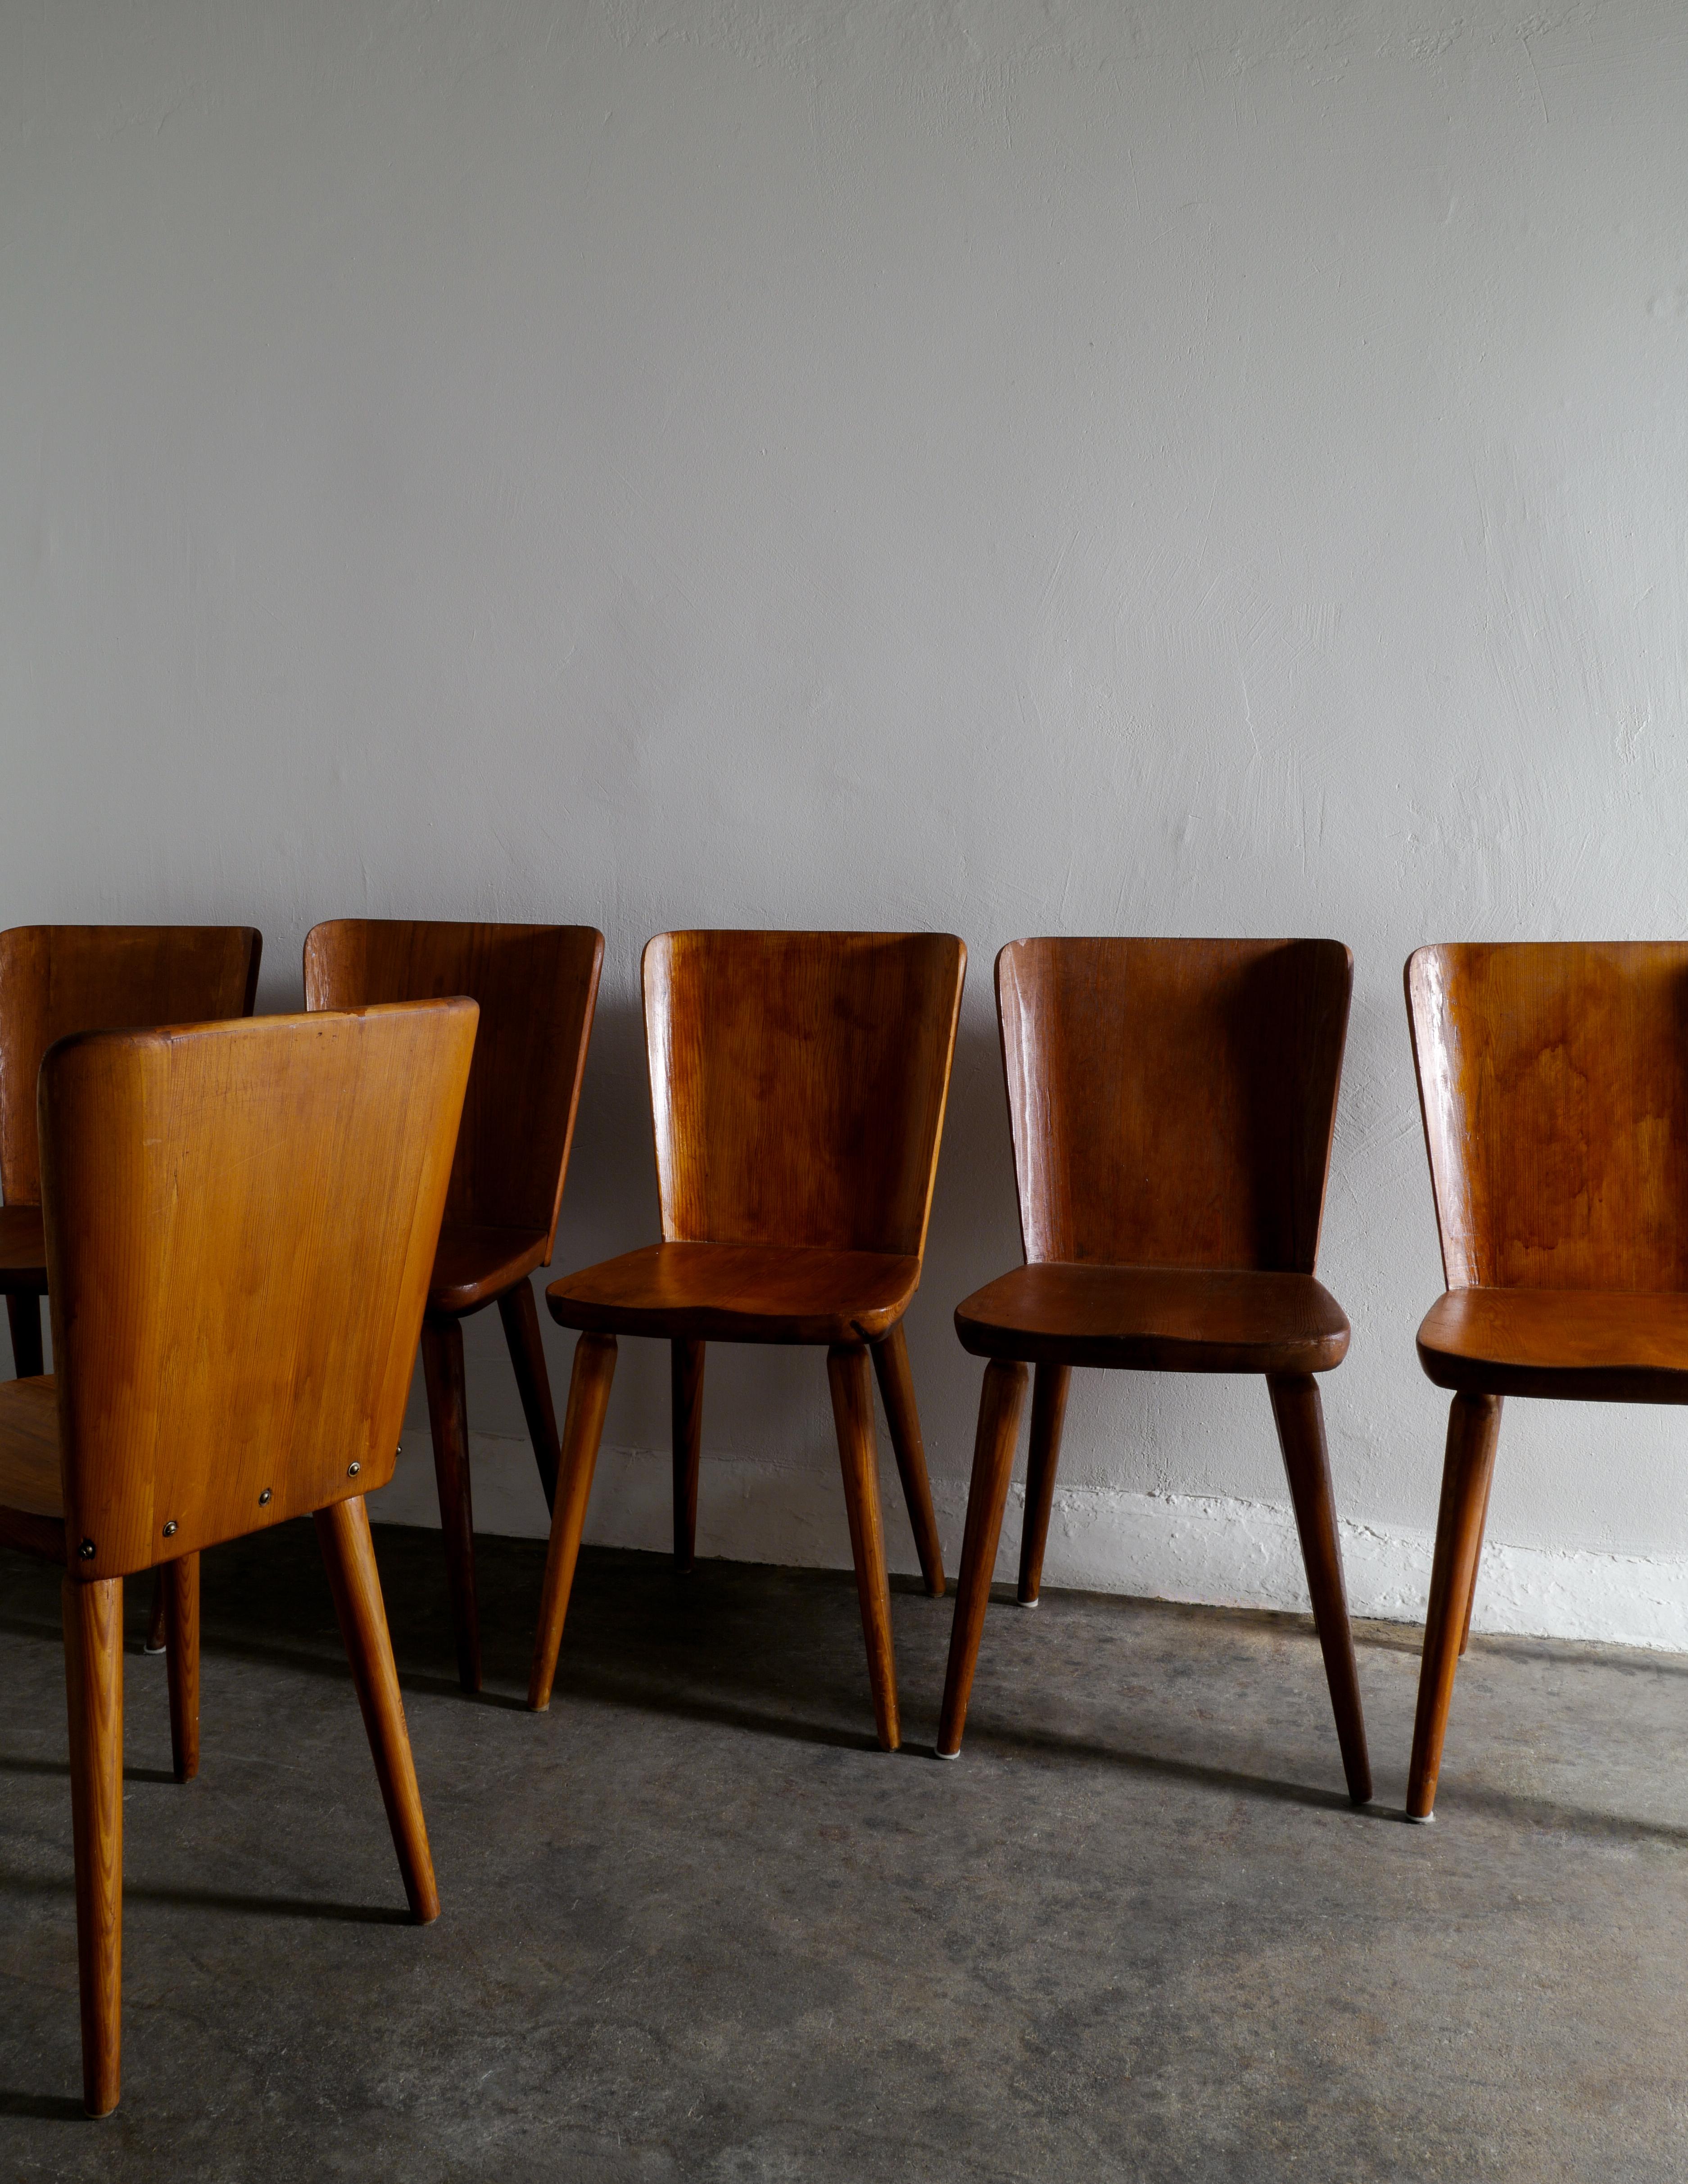 Mid-20th Century Set of Six Dining Chairs in Pine by Göran Malmvall Produced in Sweden, 1940s